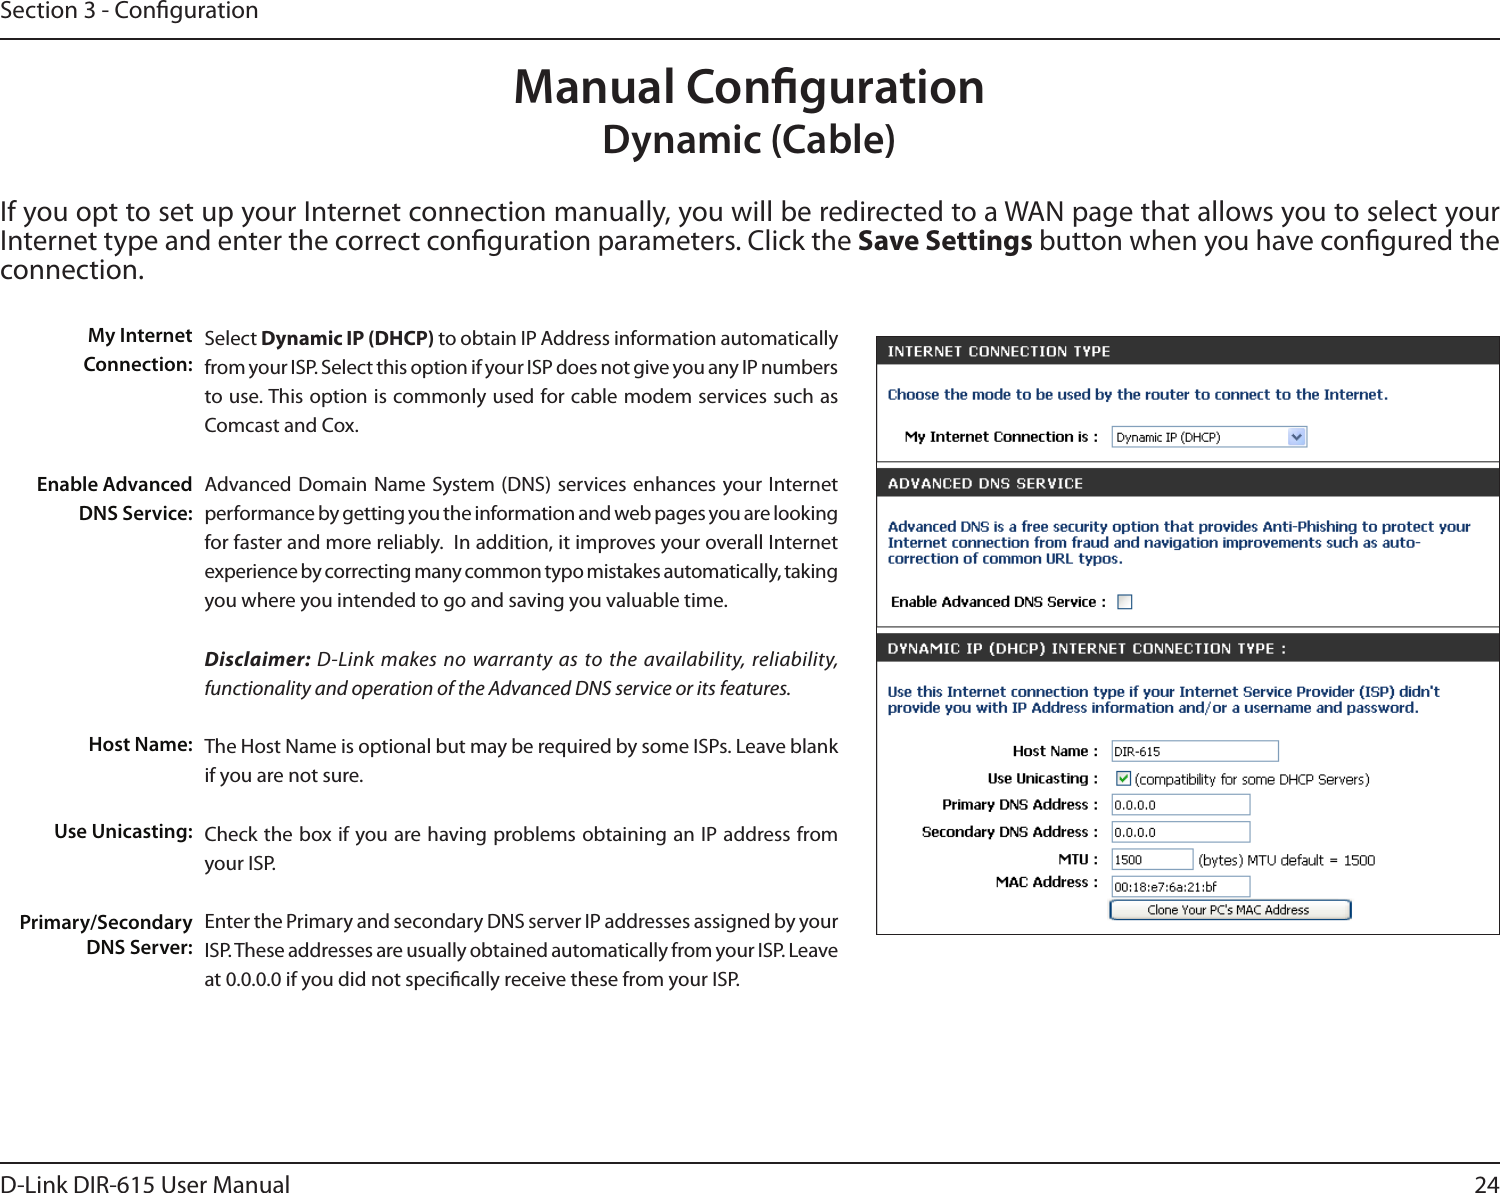 24D-Link DIR-615 User ManualSection 3 - CongurationIf you opt to set up your Internet connection manually, you will be redirected to a WAN page that allows you to select your Internet type and enter the correct conguration parameters. Click the Save Settings button when you have congured the connection.Manual CongurationDynamic (Cable)Select Dynamic IP (DHCP) to obtain IP Address information automatically from your ISP. Select this option if your ISP does not give you any IP numbers to use. This option is commonly used for cable modem services such as Comcast and Cox.Advanced Domain  Name System (DNS)  services enhances  your Internet performance by getting you the information and web pages you are looking for faster and more reliably.  In addition, it improves your overall Internet experience by correcting many common typo mistakes automatically, taking you where you intended to go and saving you valuable time.Disclaimer: D-Link makes no warranty as to the availability, reliability, functionality and operation of the Advanced DNS service or its features.The Host Name is optional but may be required by some ISPs. Leave blank if you are not sure.Check the box if you are having problems obtaining an IP address from your ISP.Enter the Primary and secondary DNS server IP addresses assigned by your ISP. These addresses are usually obtained automatically from your ISP. Leave at 0.0.0.0 if you did not specically receive these from your ISP.My Internet Connection:Enable Advanced DNS Service:Host Name:Use Unicasting:Primary/Secondary DNS Server: